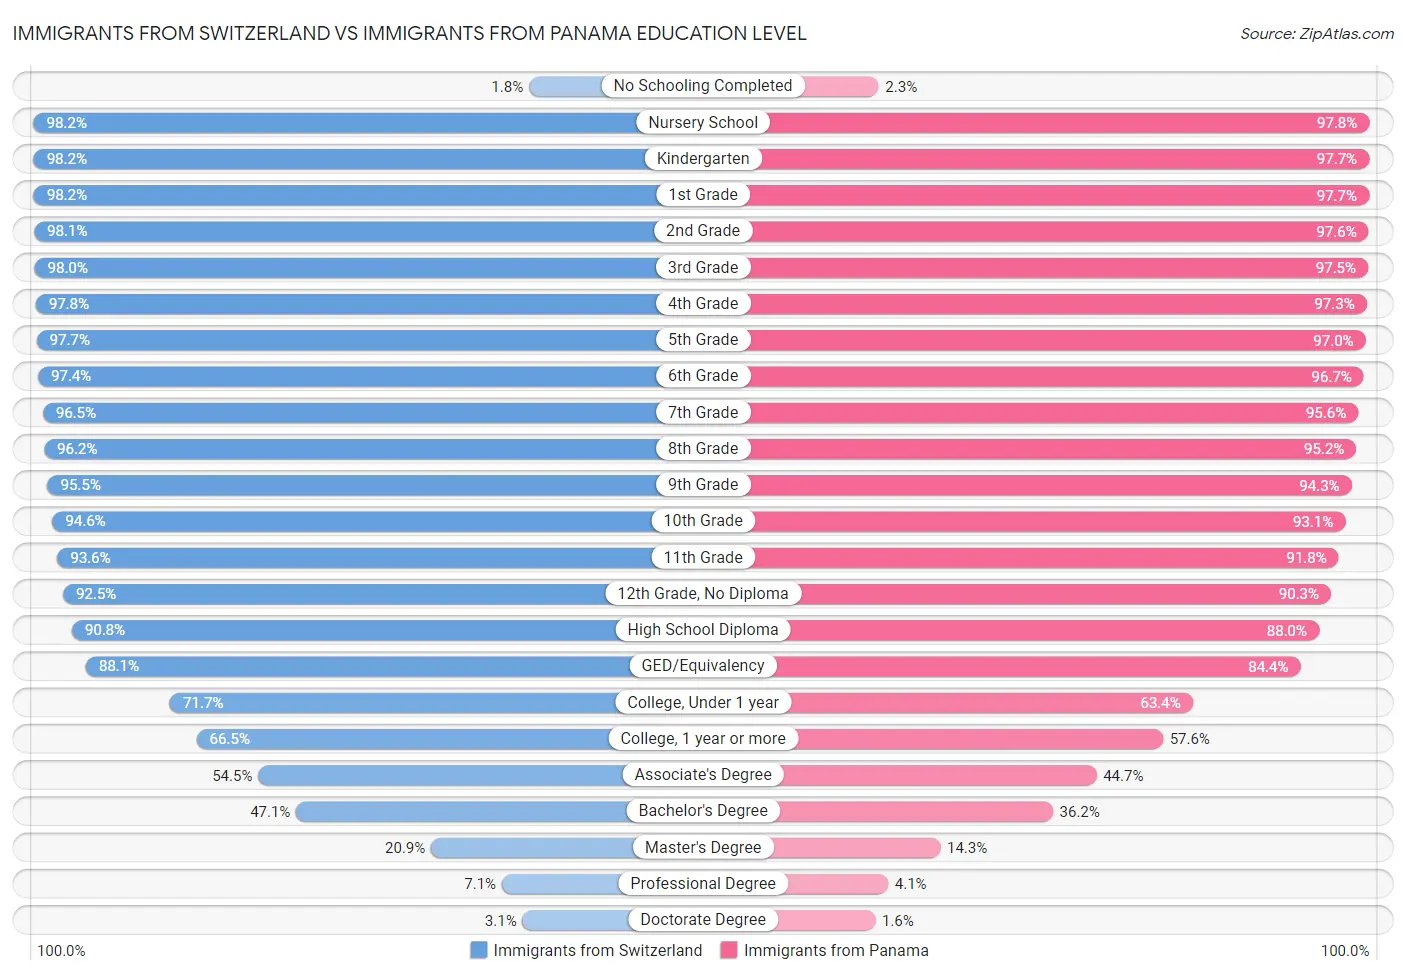 Immigrants from Switzerland vs Immigrants from Panama Education Level